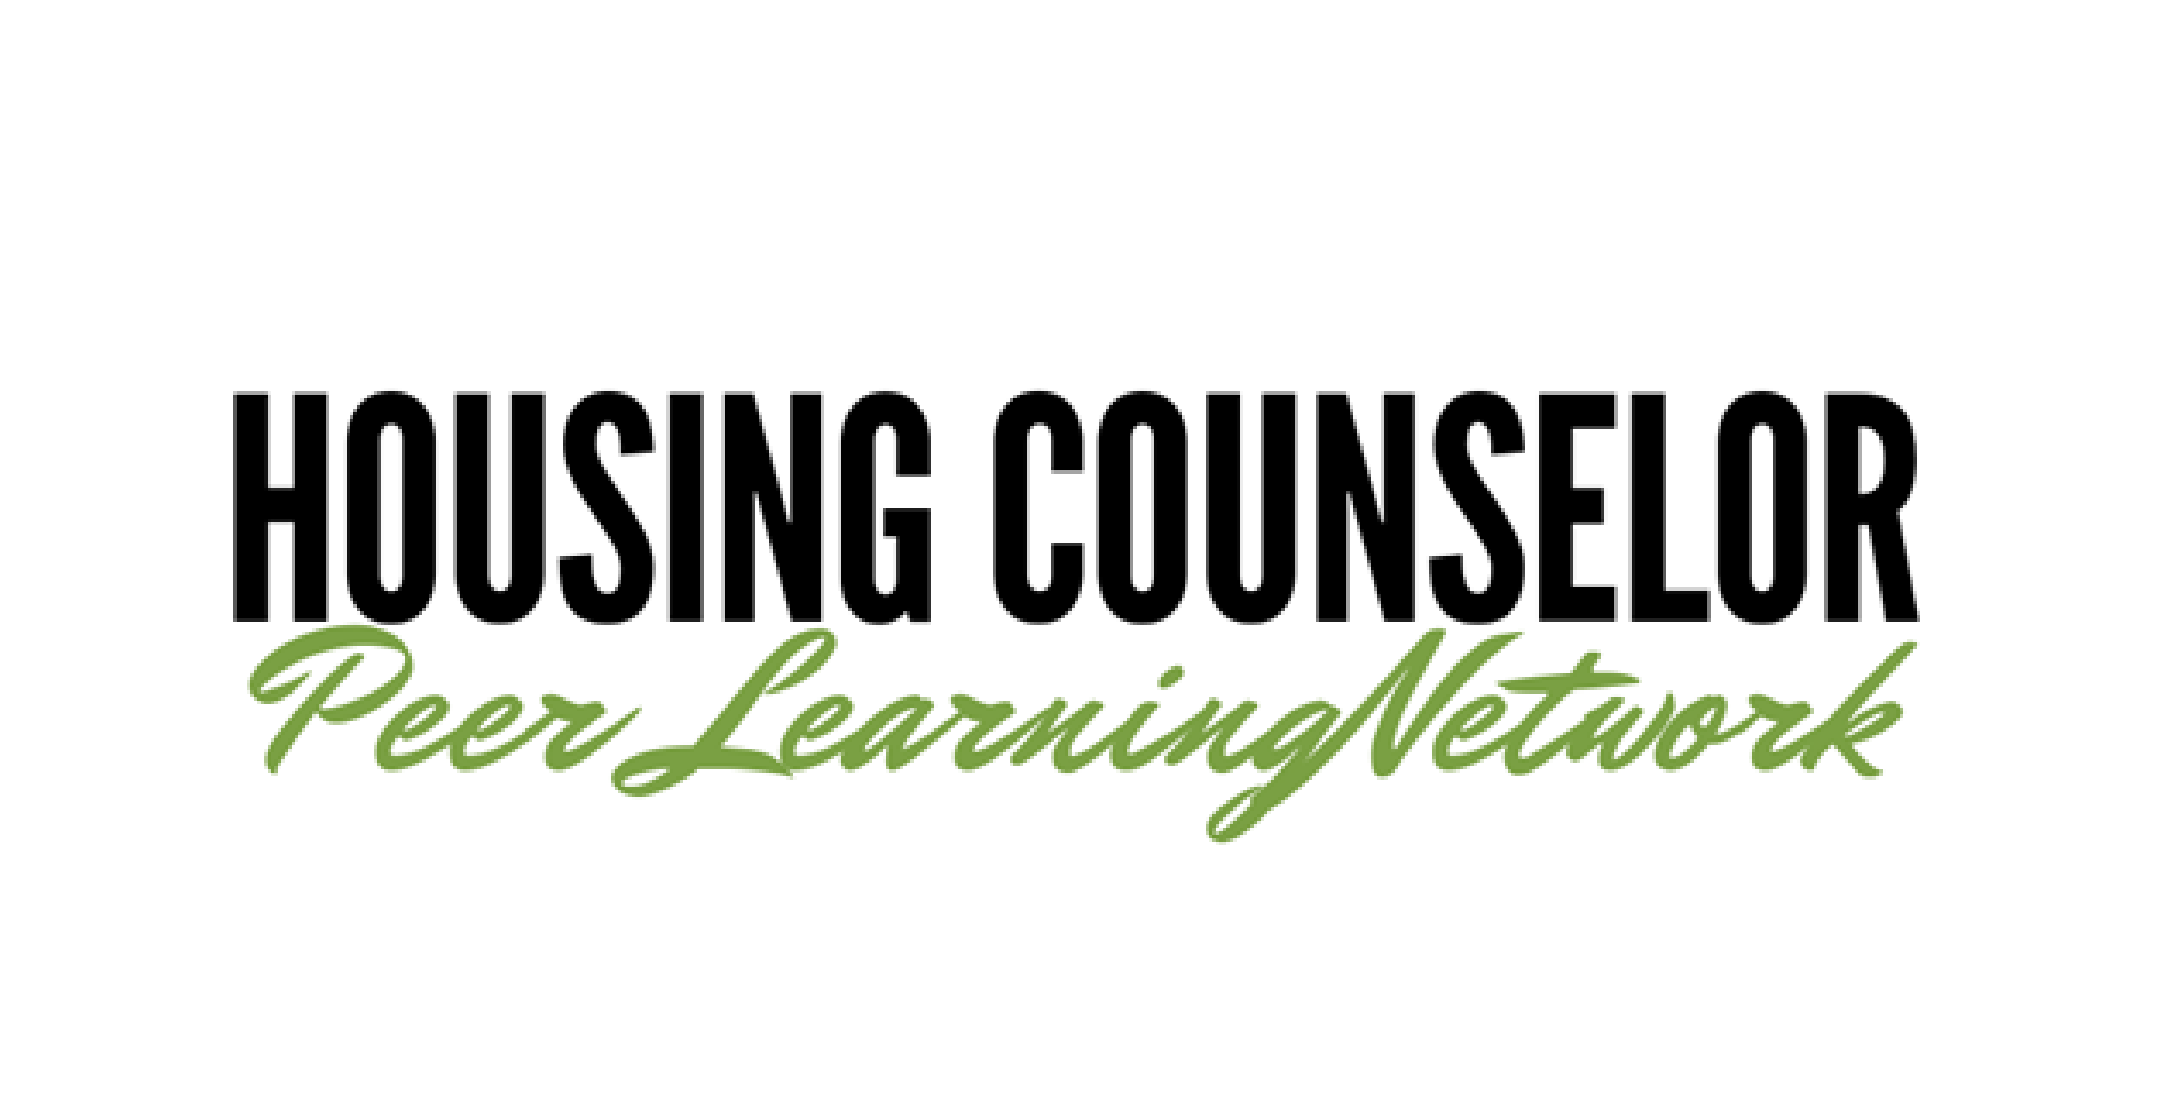 Housing Counselor Peer Learning Network